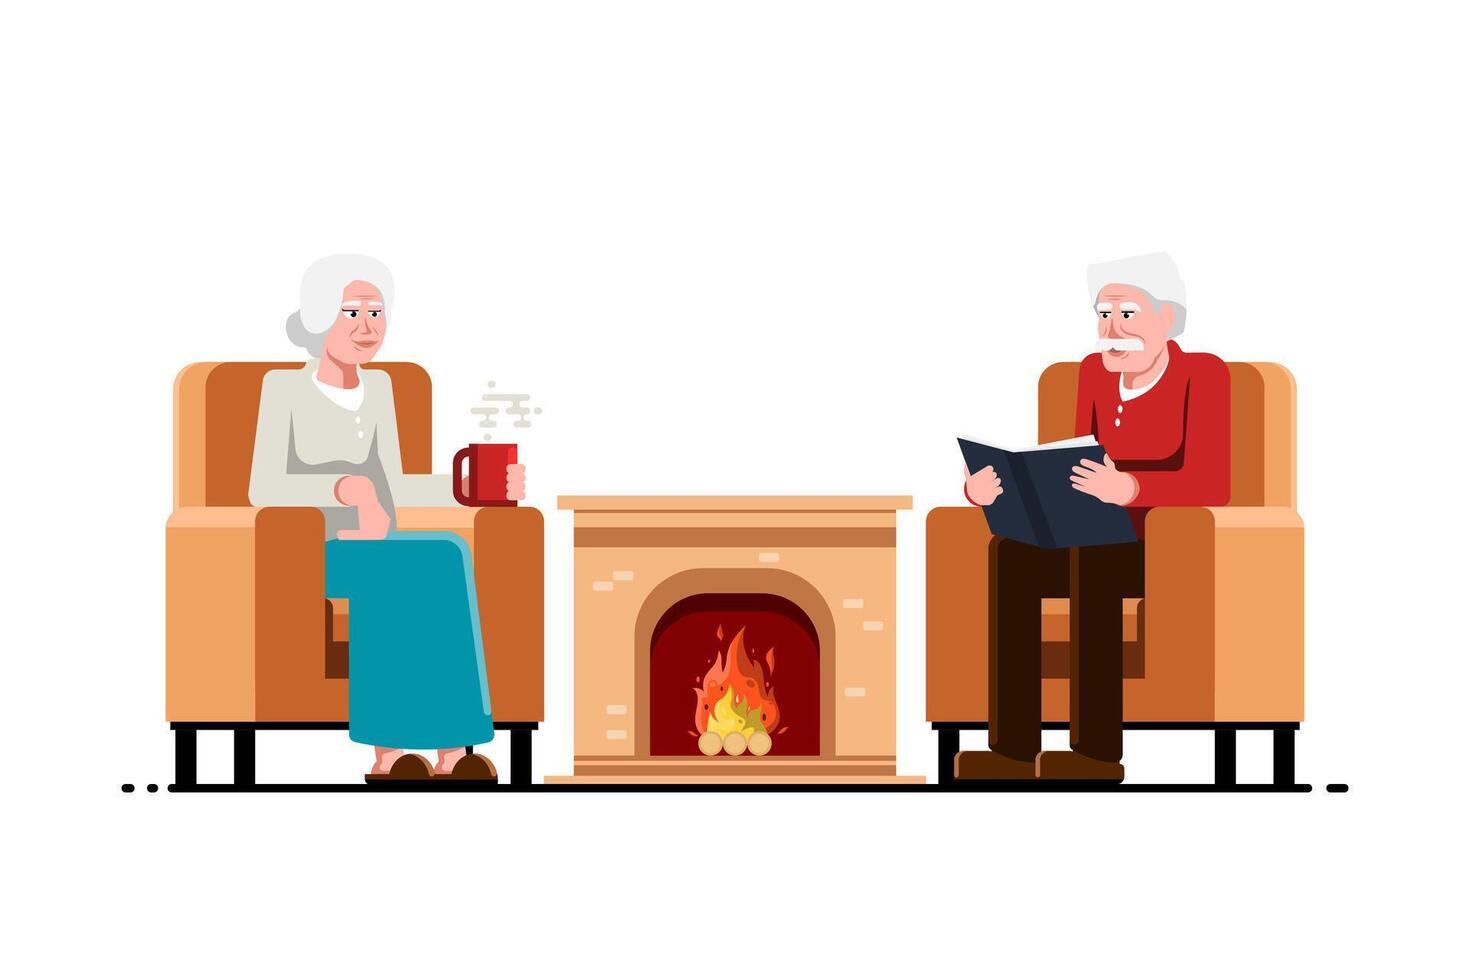 Elderly couple sitting on sofa in fireplace room on isolated background, Vector illustration.